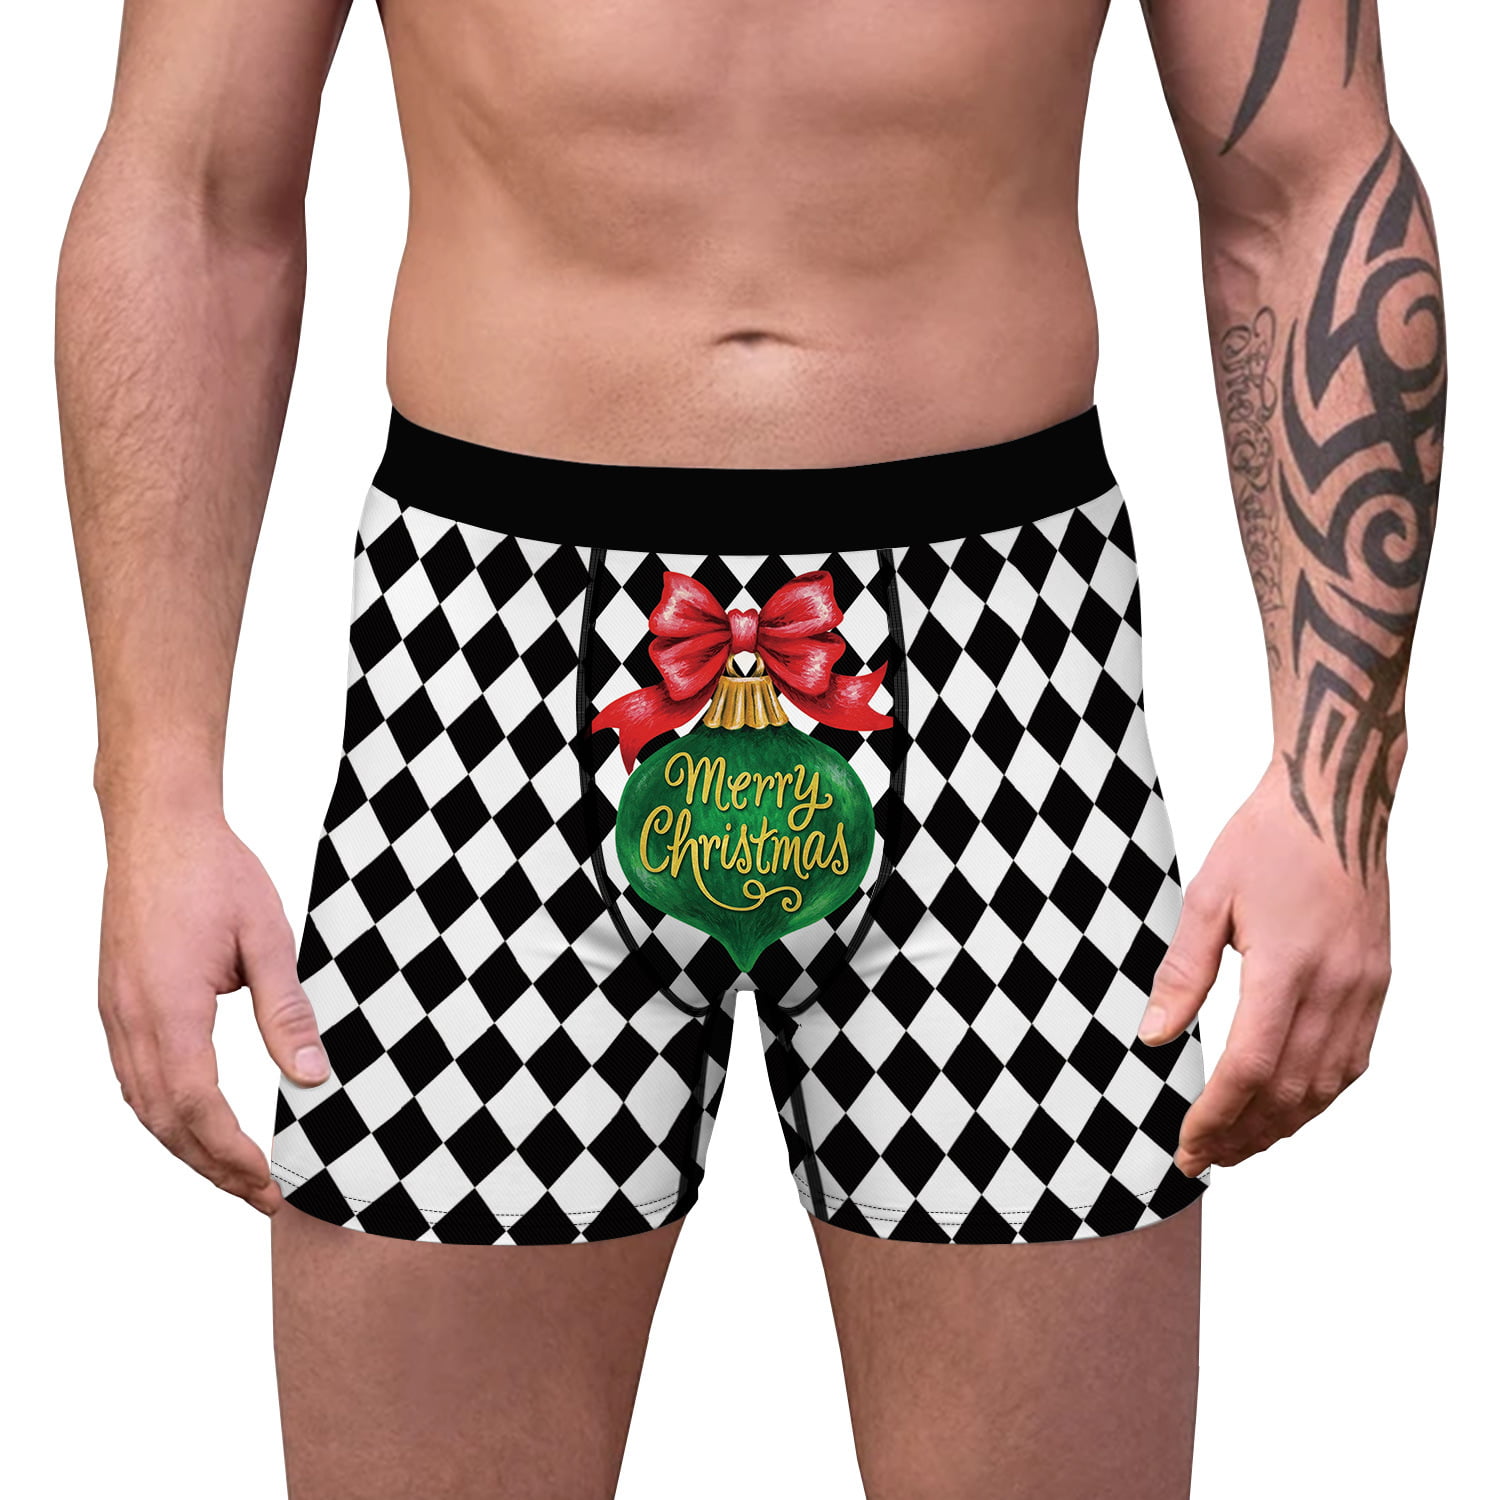 Mens Novelty Boxer Briefs Stretchy Underwear Breathable Underpants Shorts S-XL 